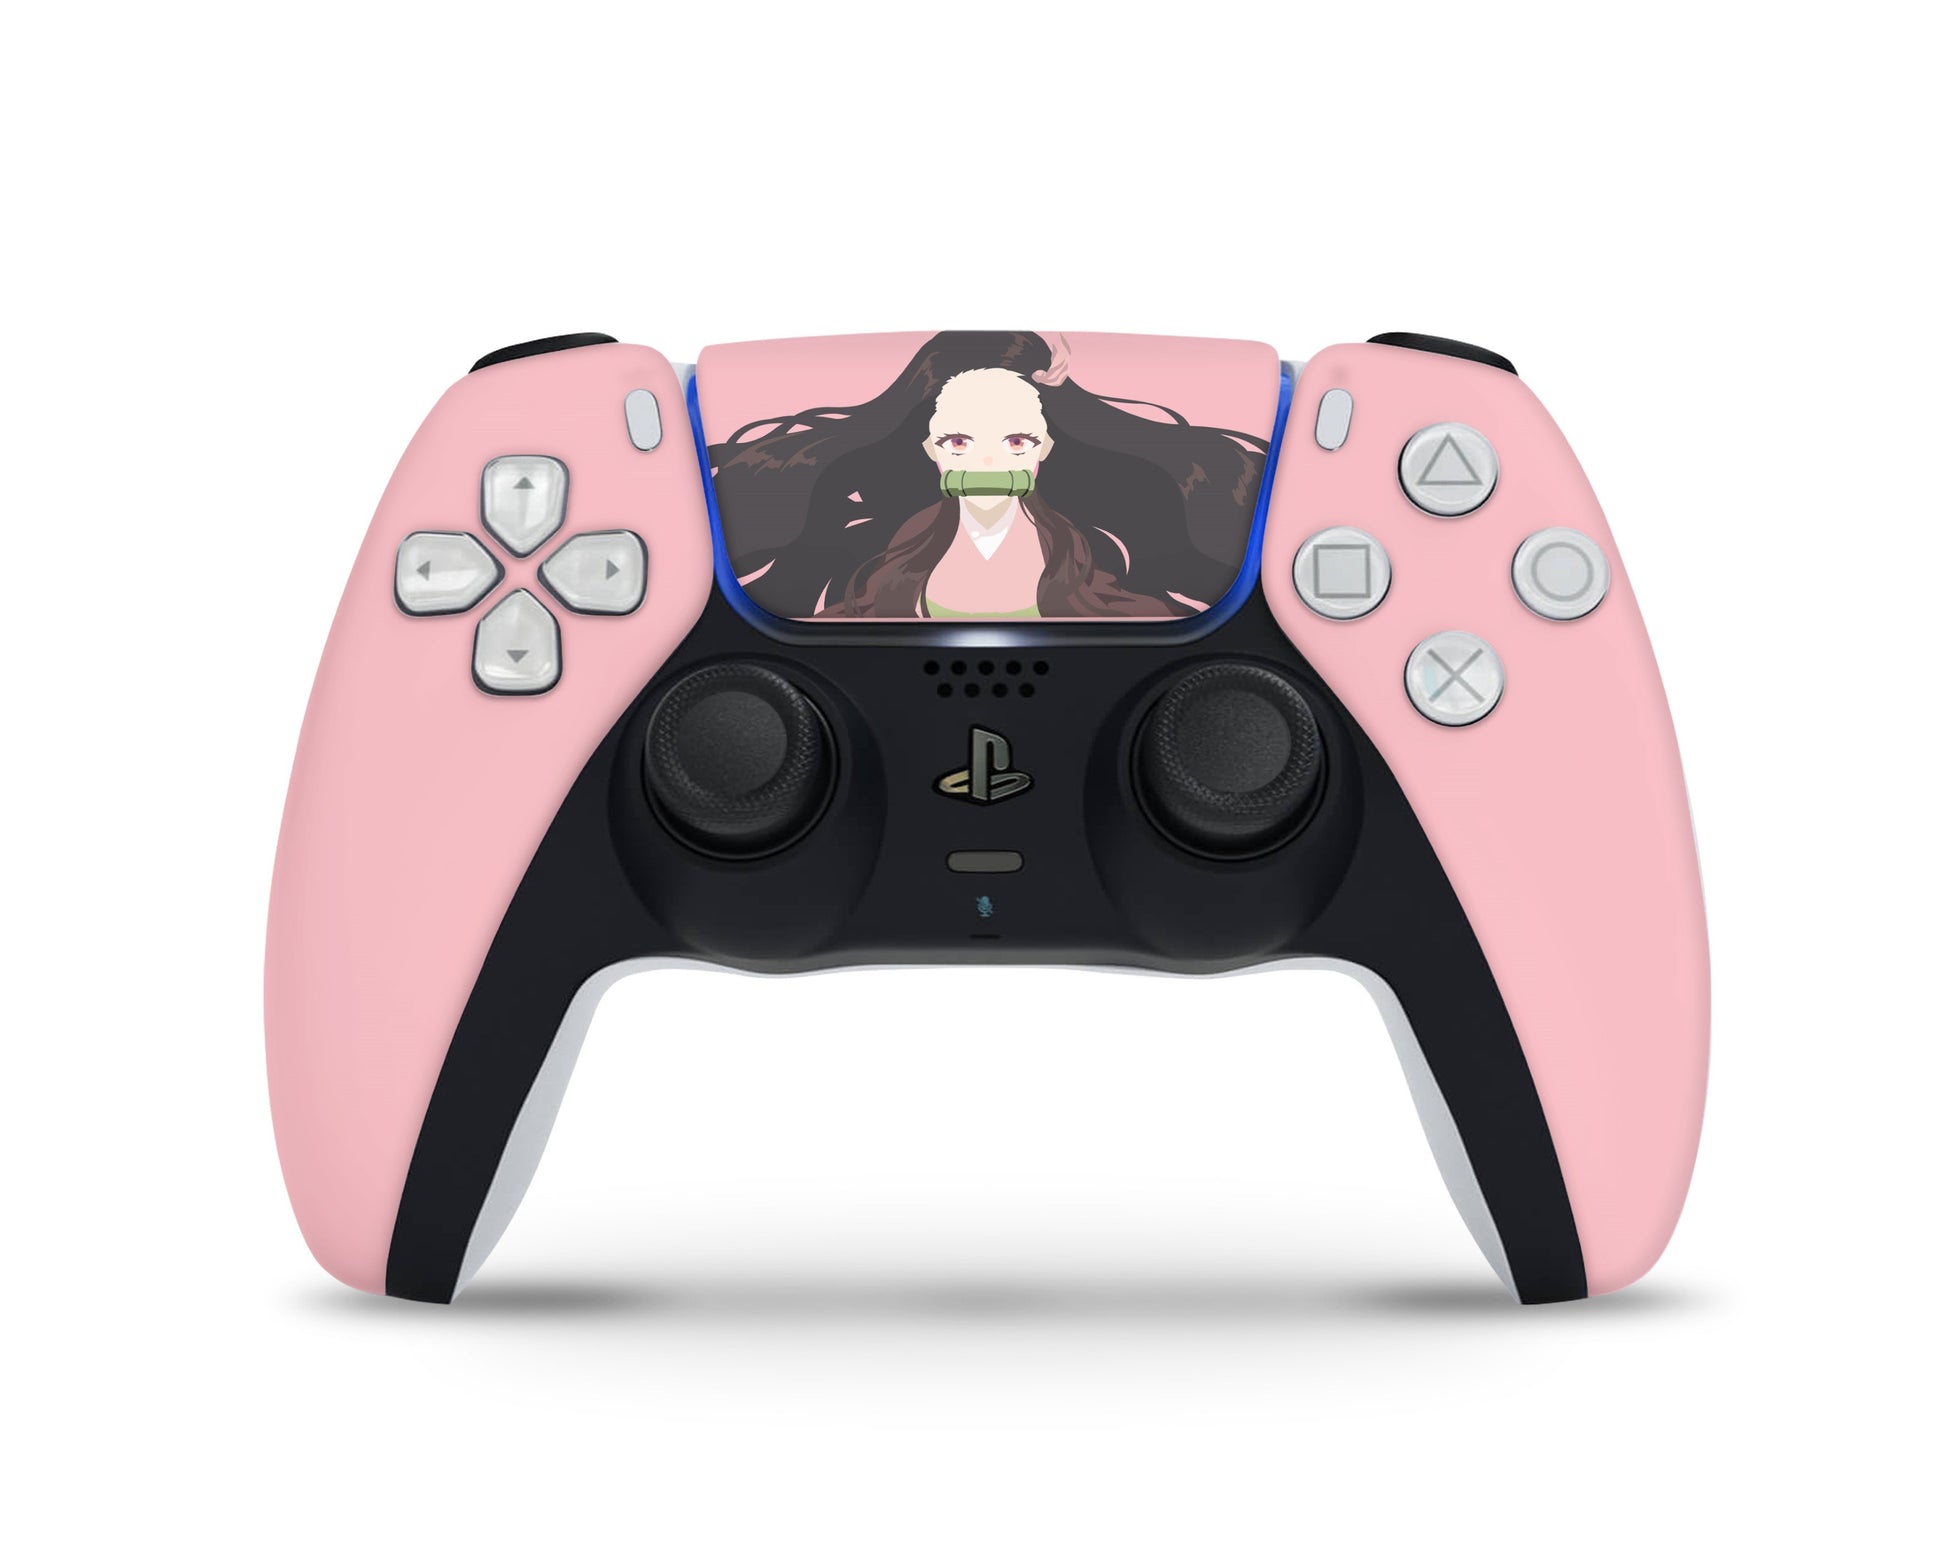 Ps5 Skin Pink, Playstation 5 Controller Skin ,vinyl 3m Stickers